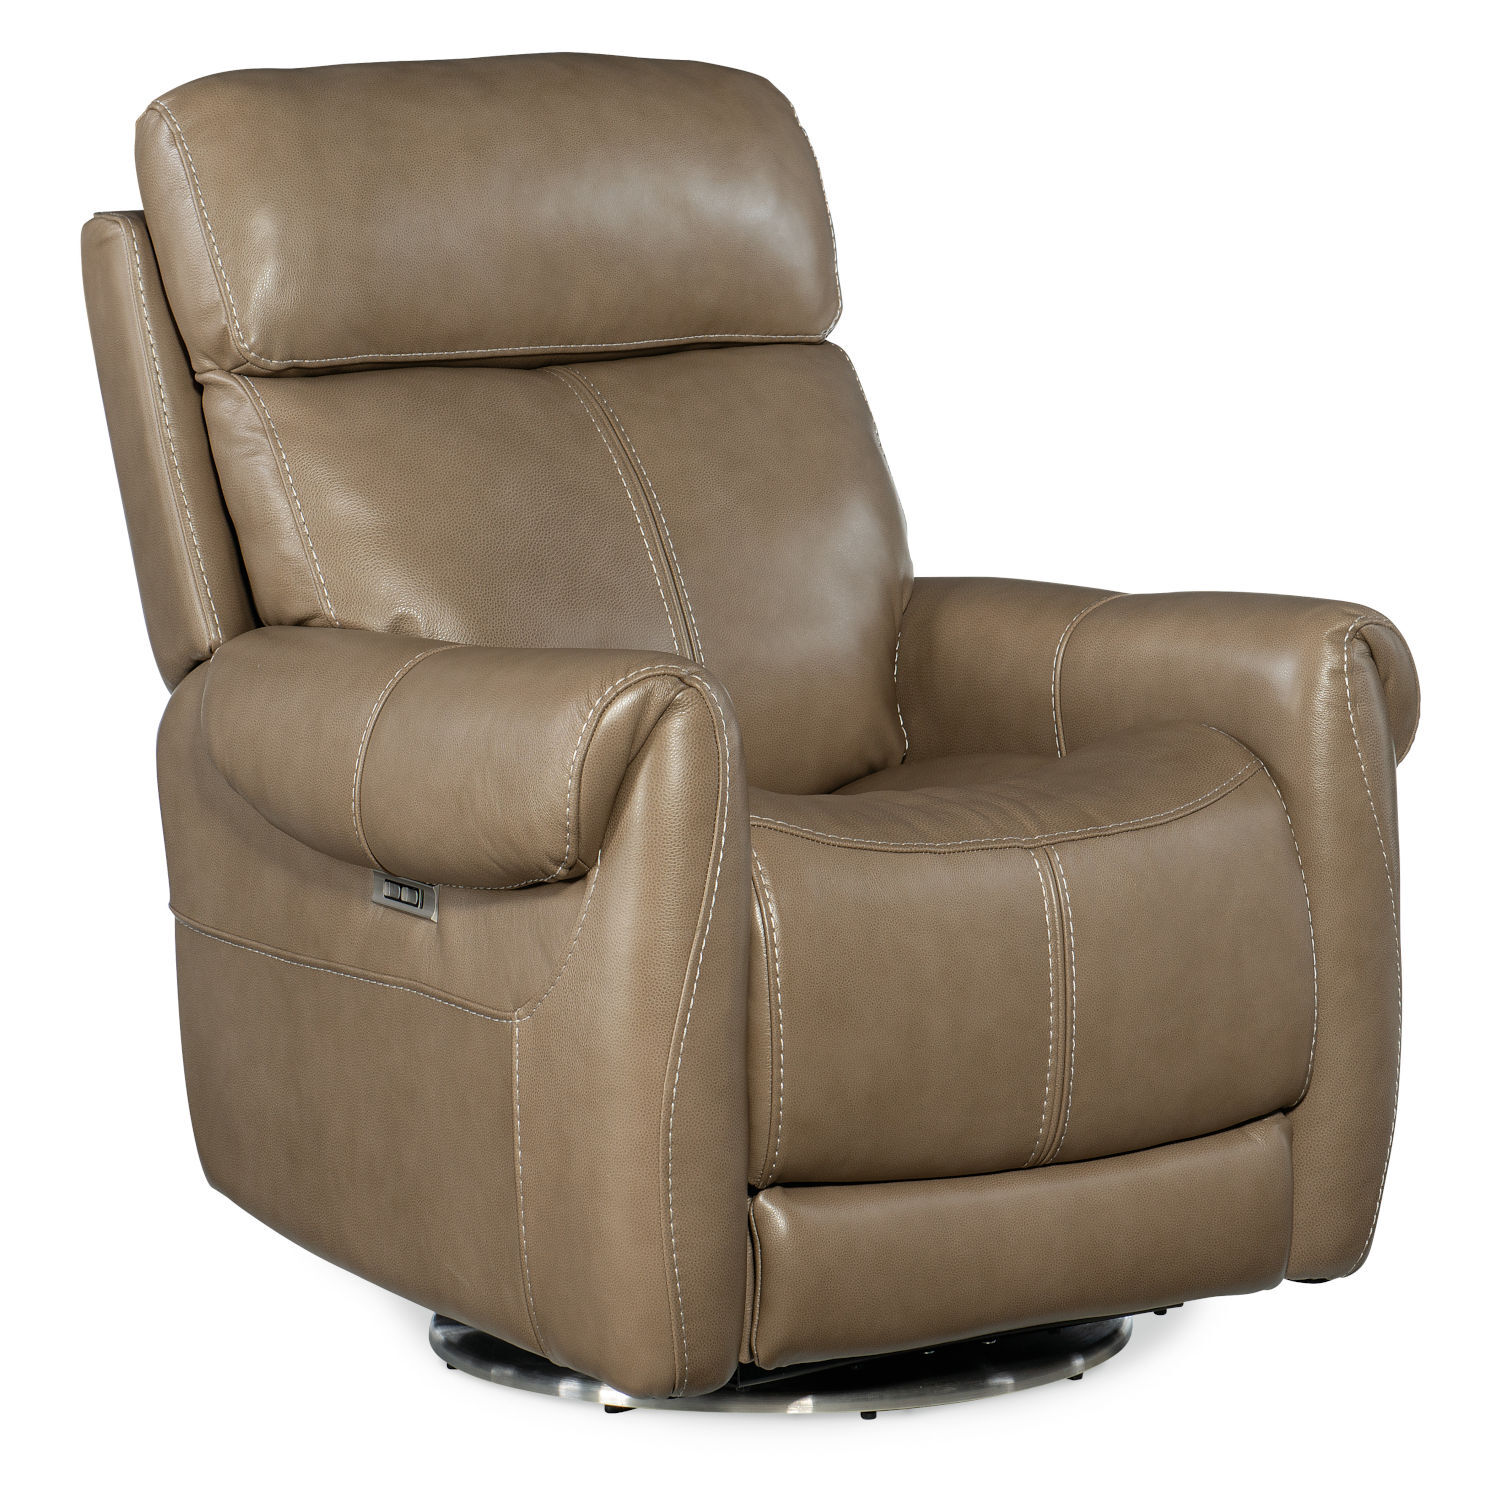 Hooker Furniture Chairs And Recliners on Sale | Bellacor